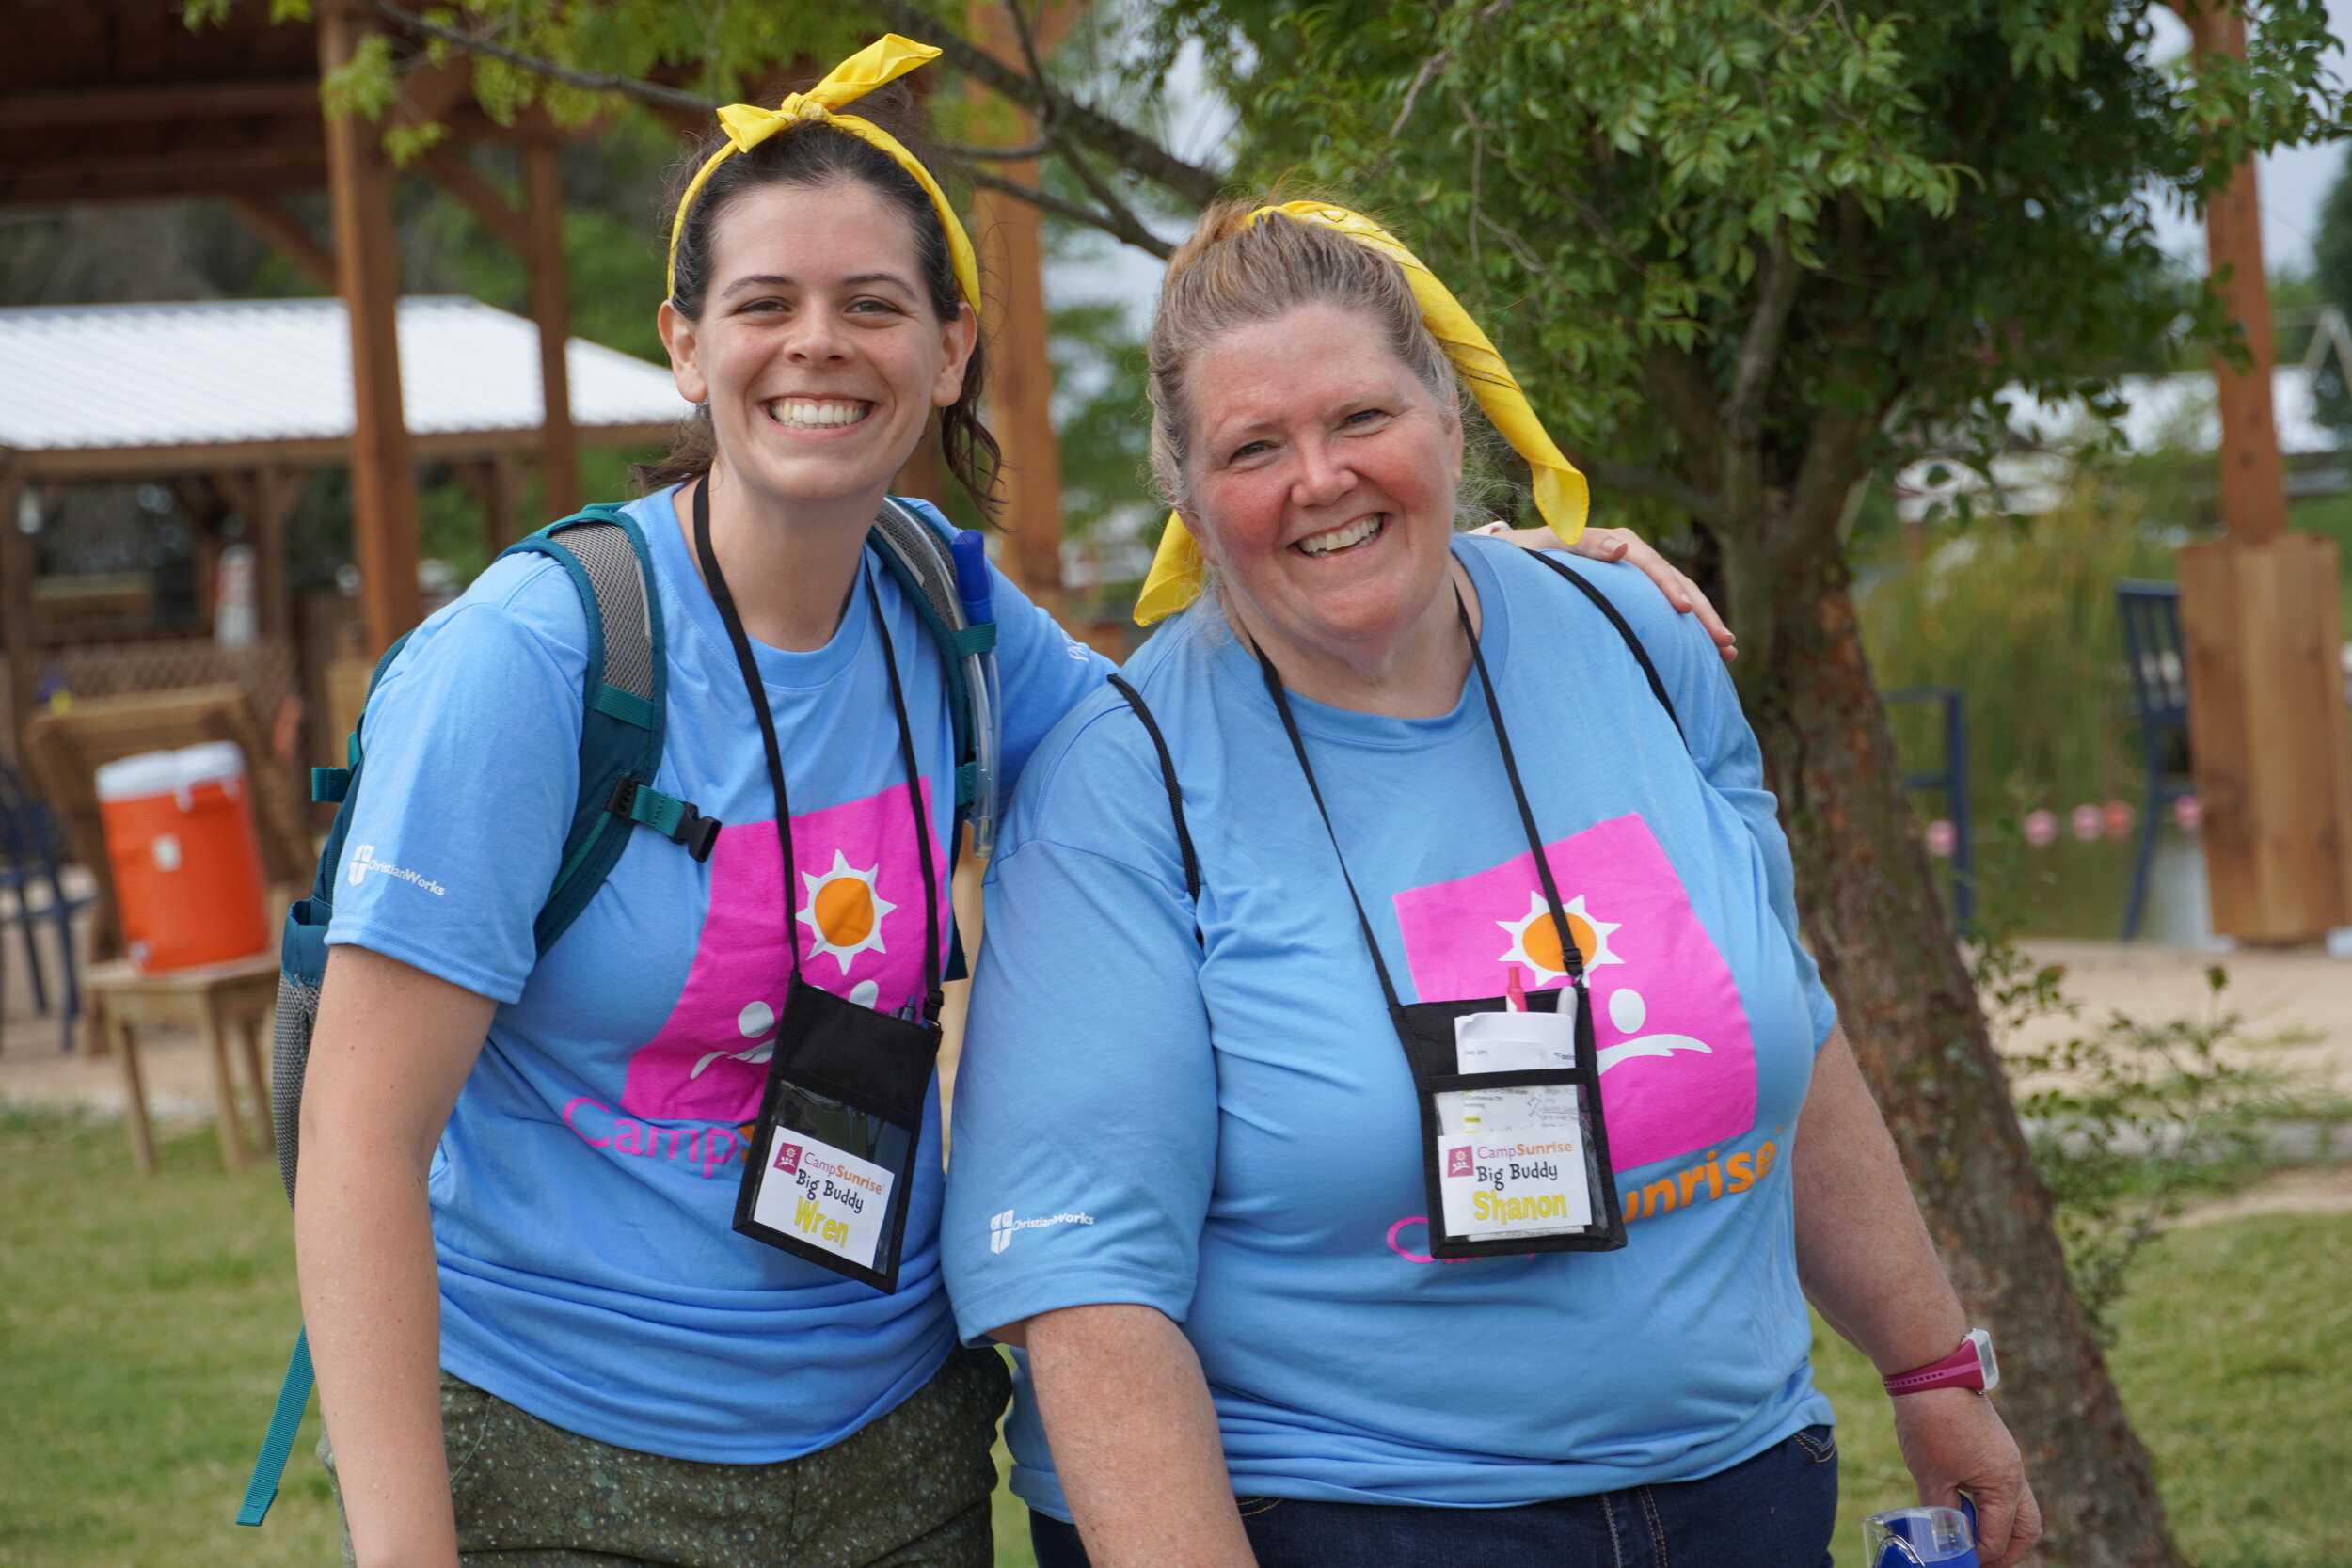  The GriefWorks program offers free support groups for children and their families which are led by volunteer facilitators like Camp Buddies, Wren and Shanon. Volunteers come from all walks of life – counselors, nurses, teachers, church members.  All